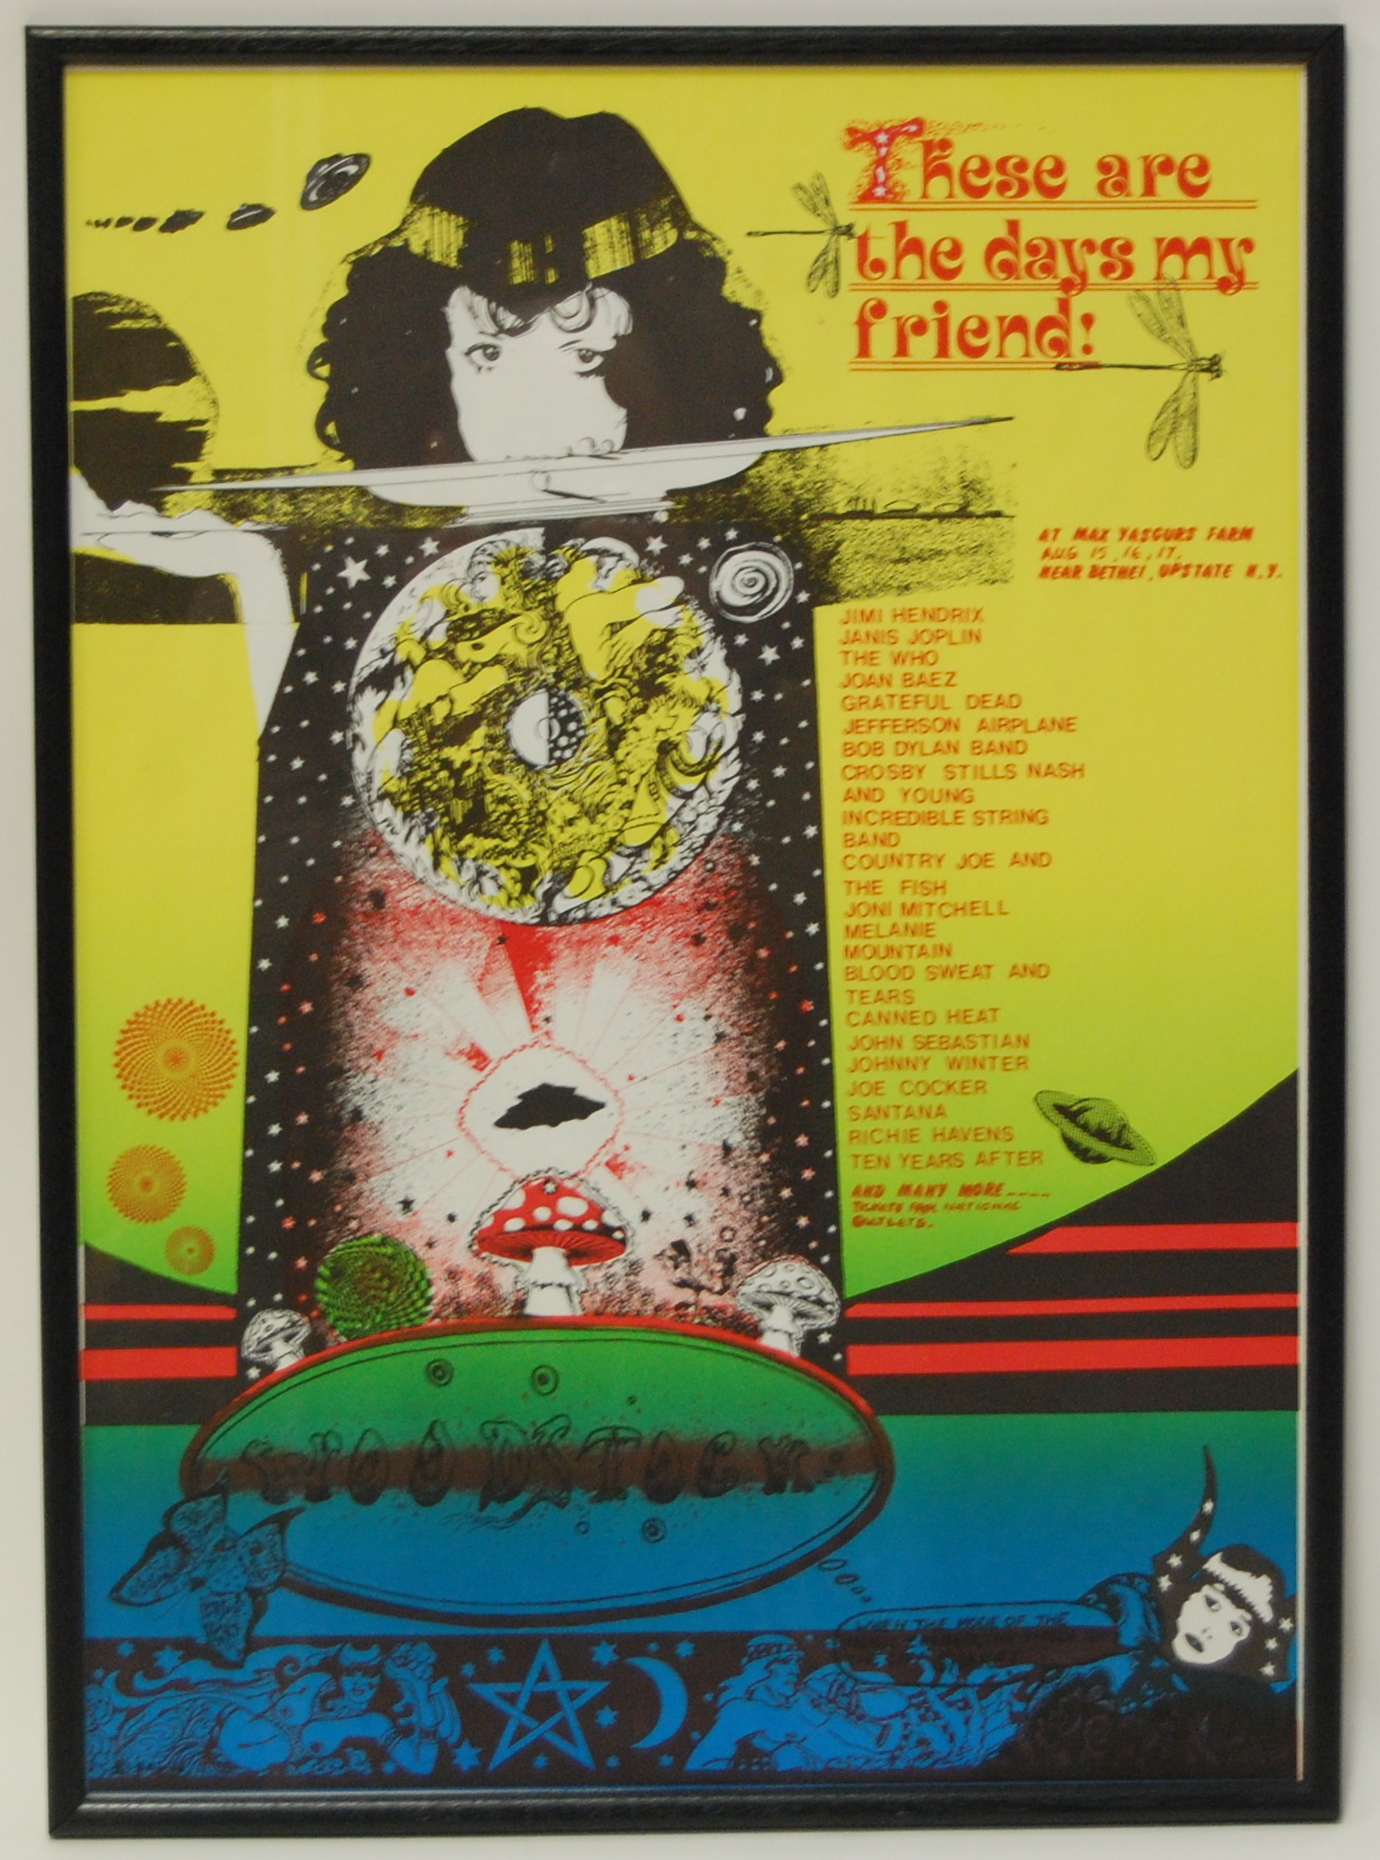 Woodstock, These are the Days My Friend, promotional poster, 43 x 60cm,